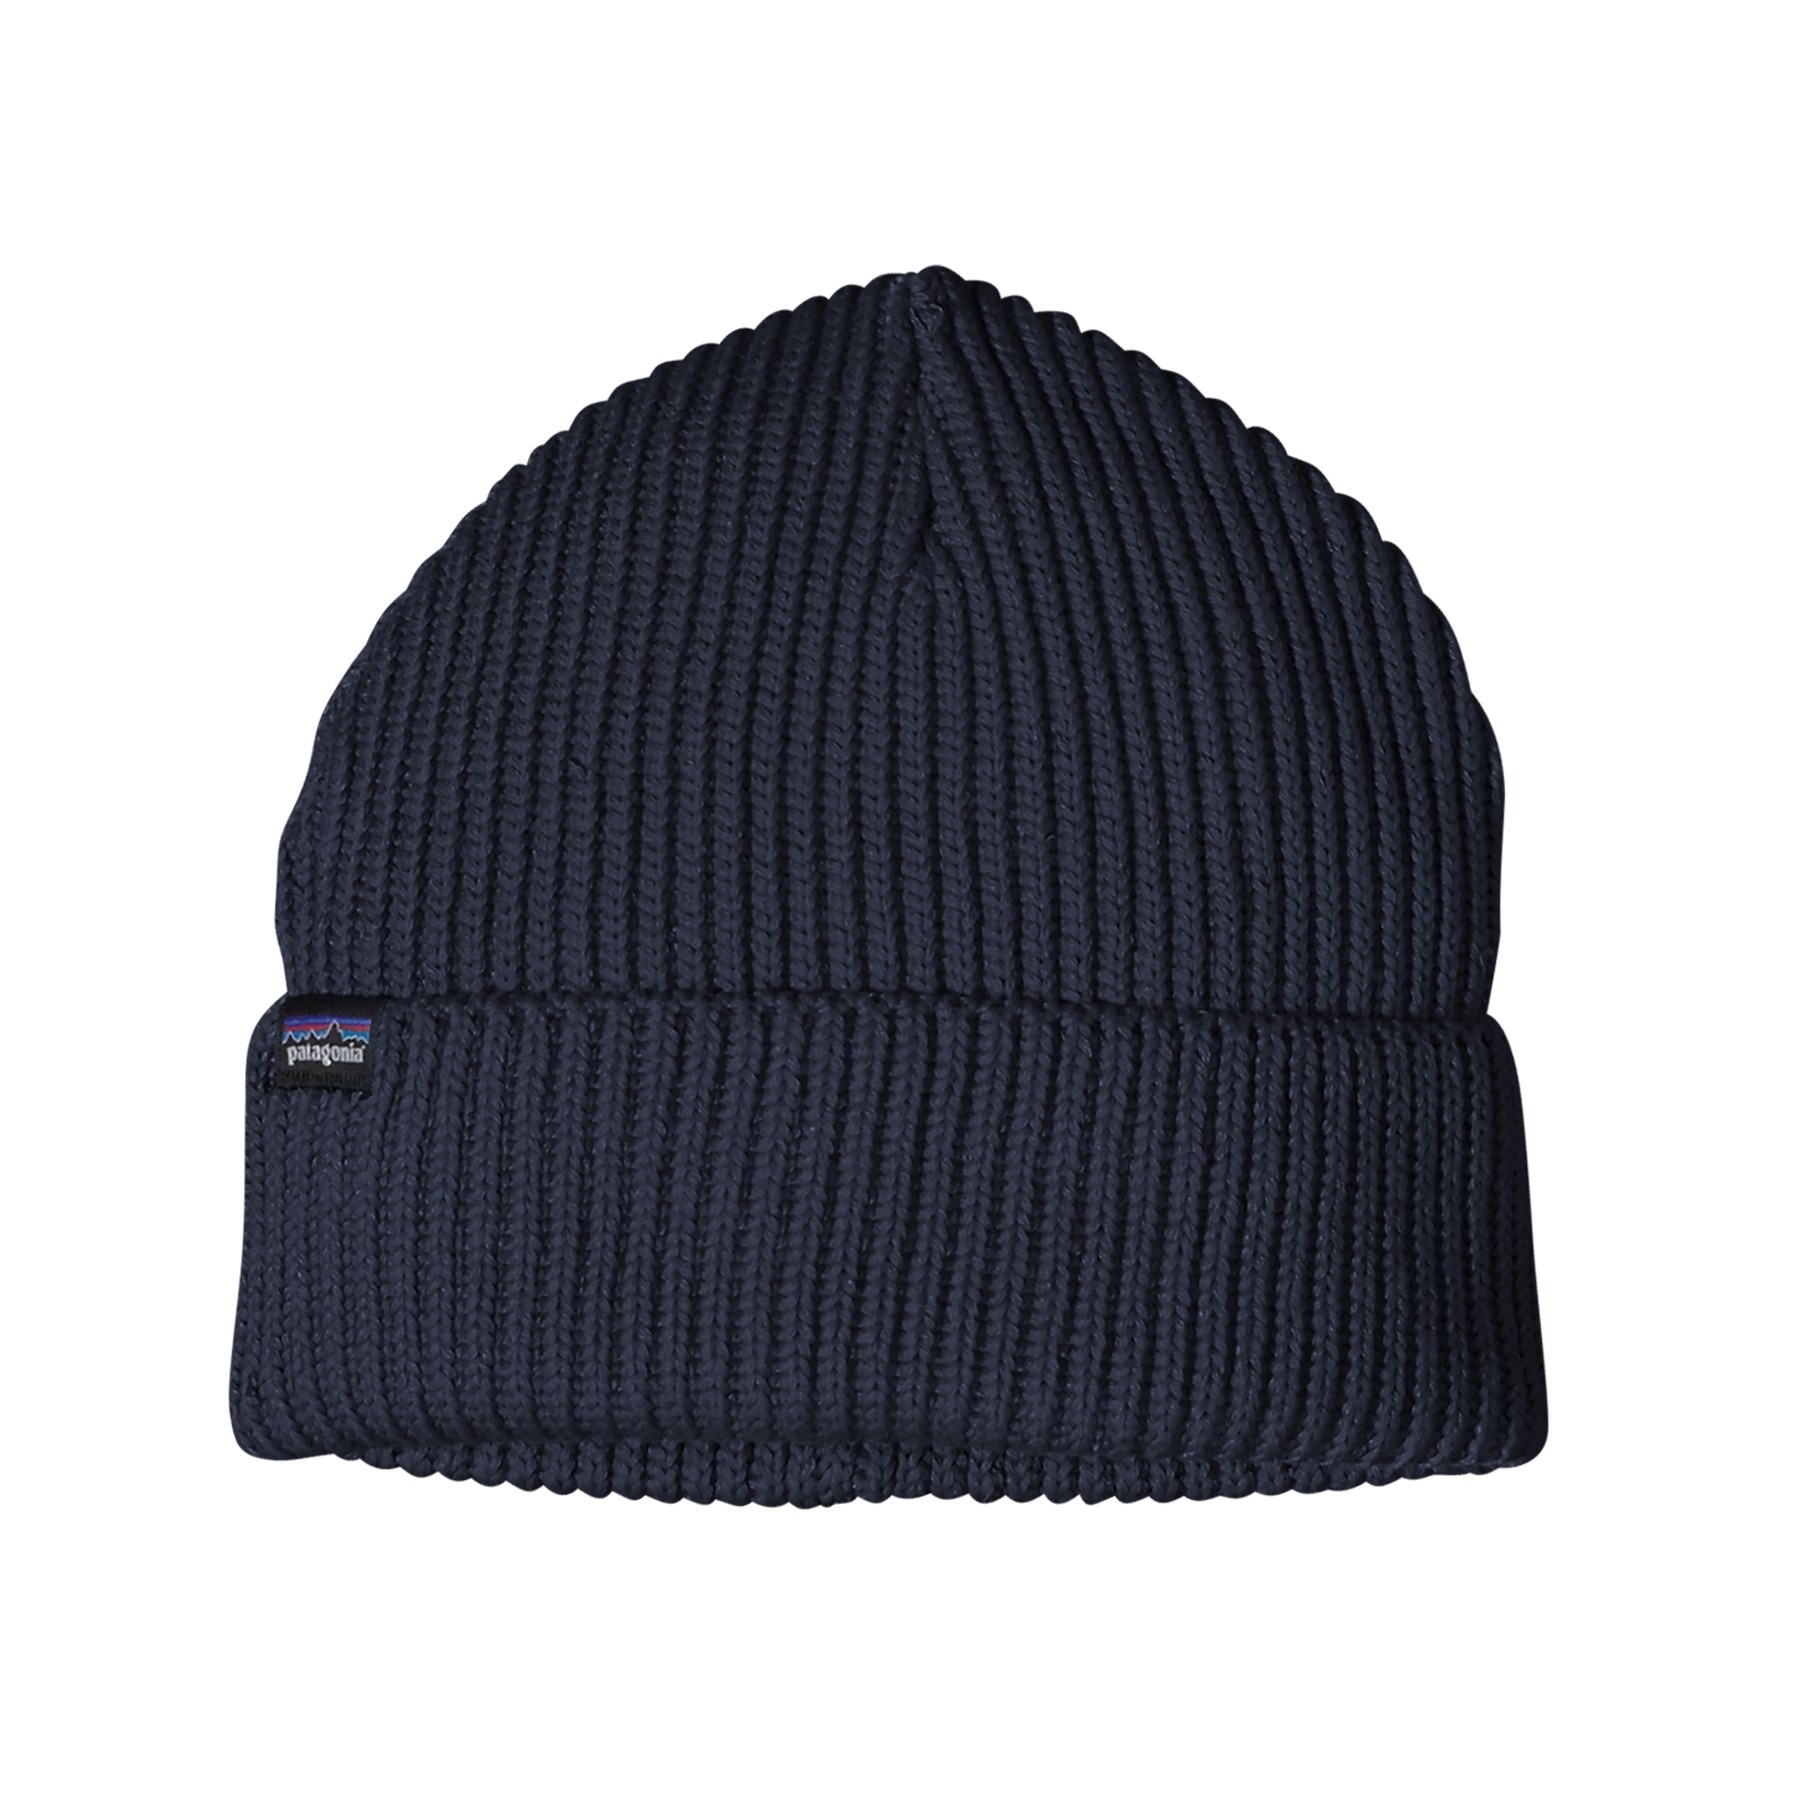 Patagonia Fisherman's Rolled Beanie : Navy Blue